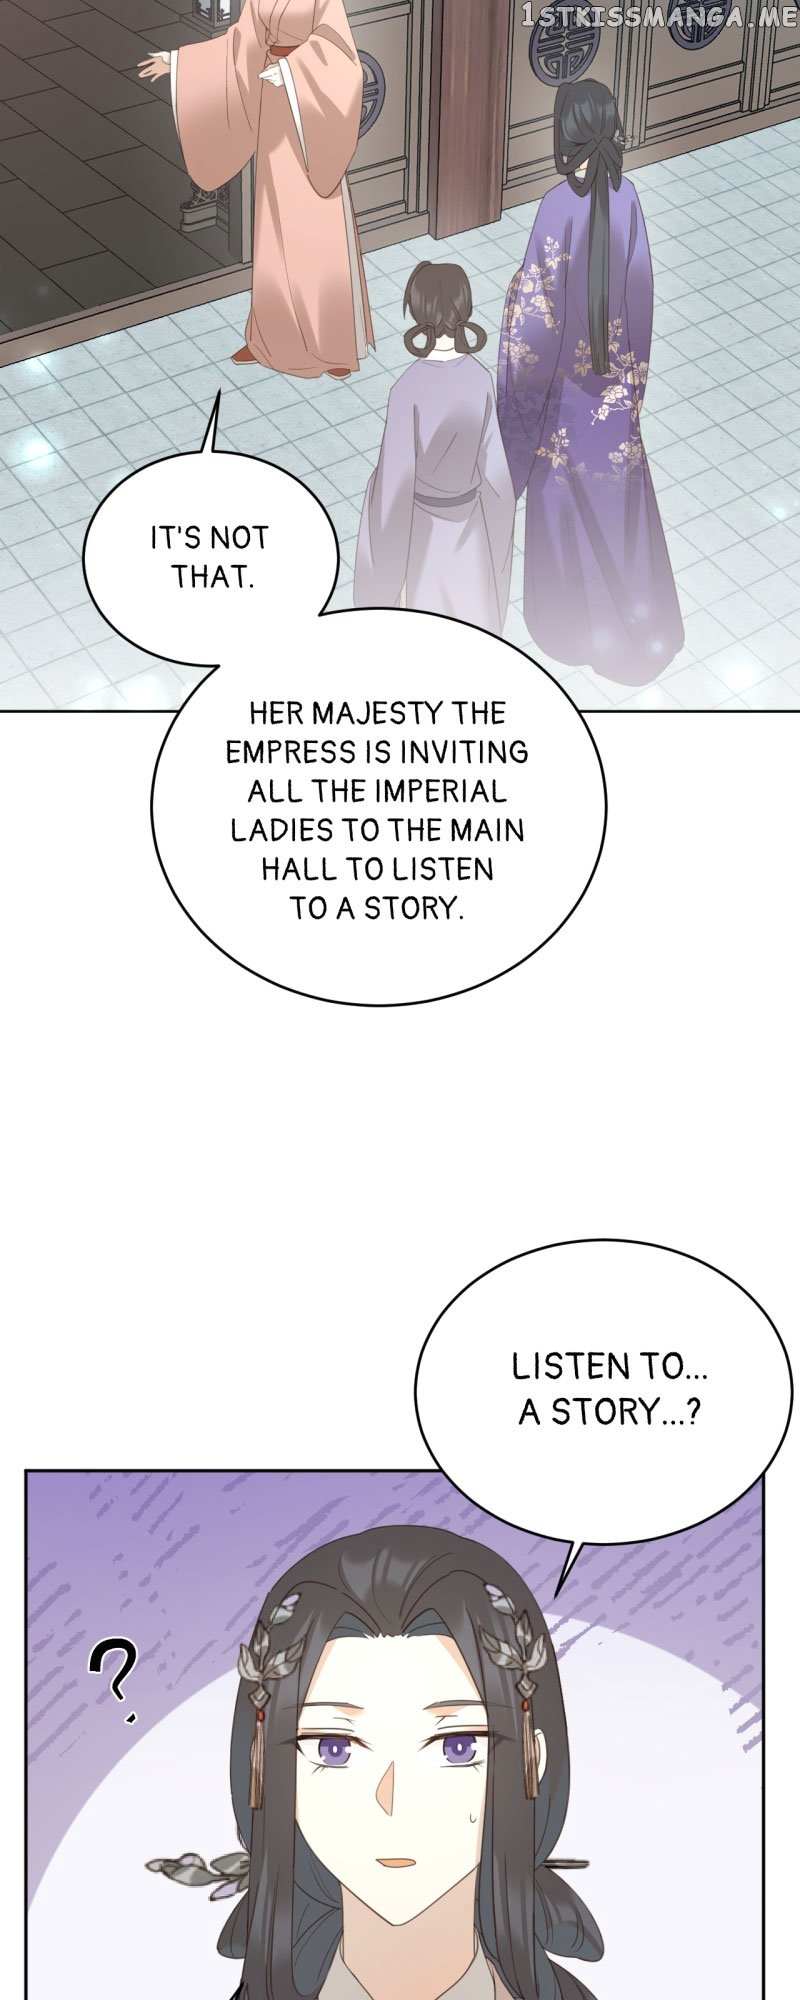 The Empress With No Virtue - Page 2